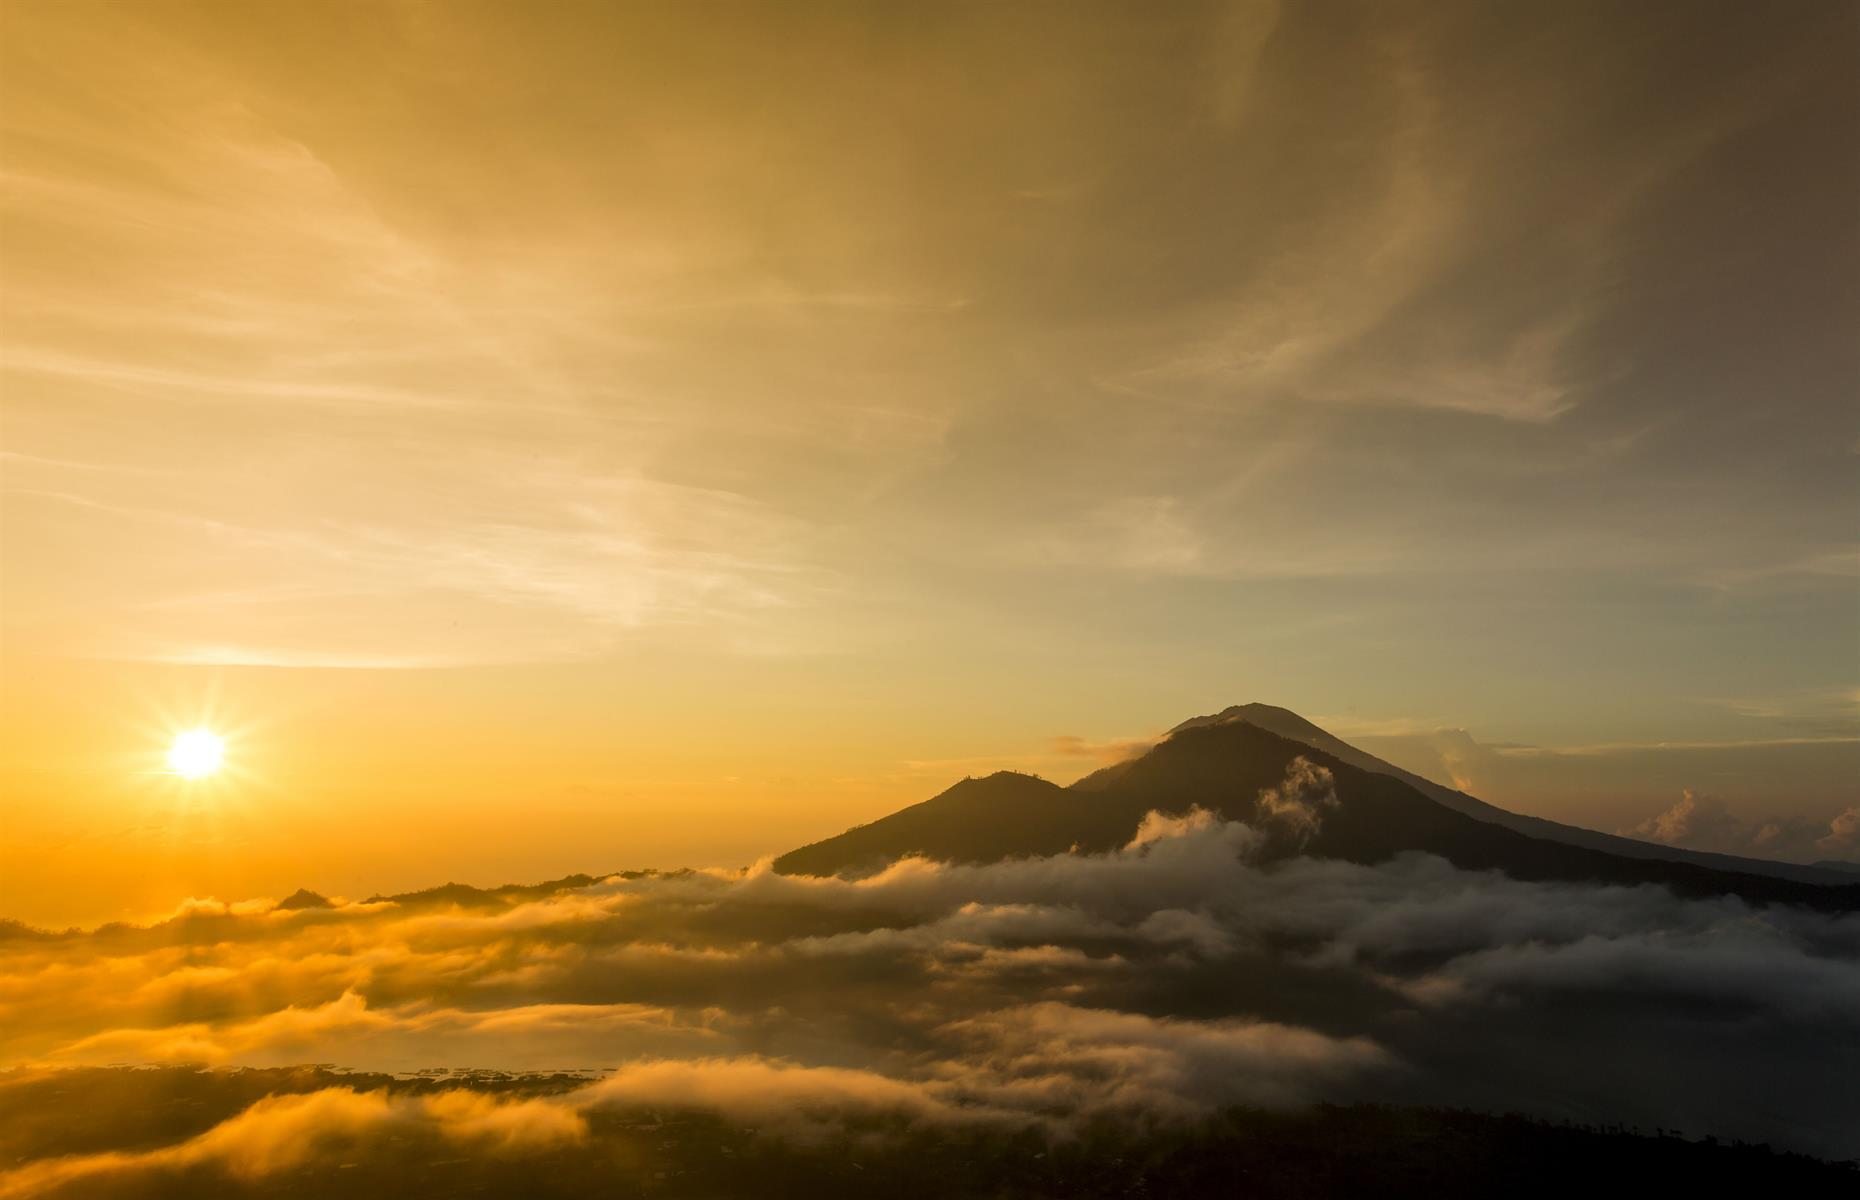 <p>Anyone who is moderately fit should be able to take on Mount Batur in Bali and witness the sun rising against the silhouette of neighboring Mount Agung. Typically tours start at 2am from the town of Ubud, but the climb itself is a pleasant and steady two hours. It's ideal for anyone who enjoys hiking and rewards you with one of the most dazzling sunrises you'll ever see. Currently Bali's airports are open for domestic tourism only, with the hope some international visitors can return from September. </p>